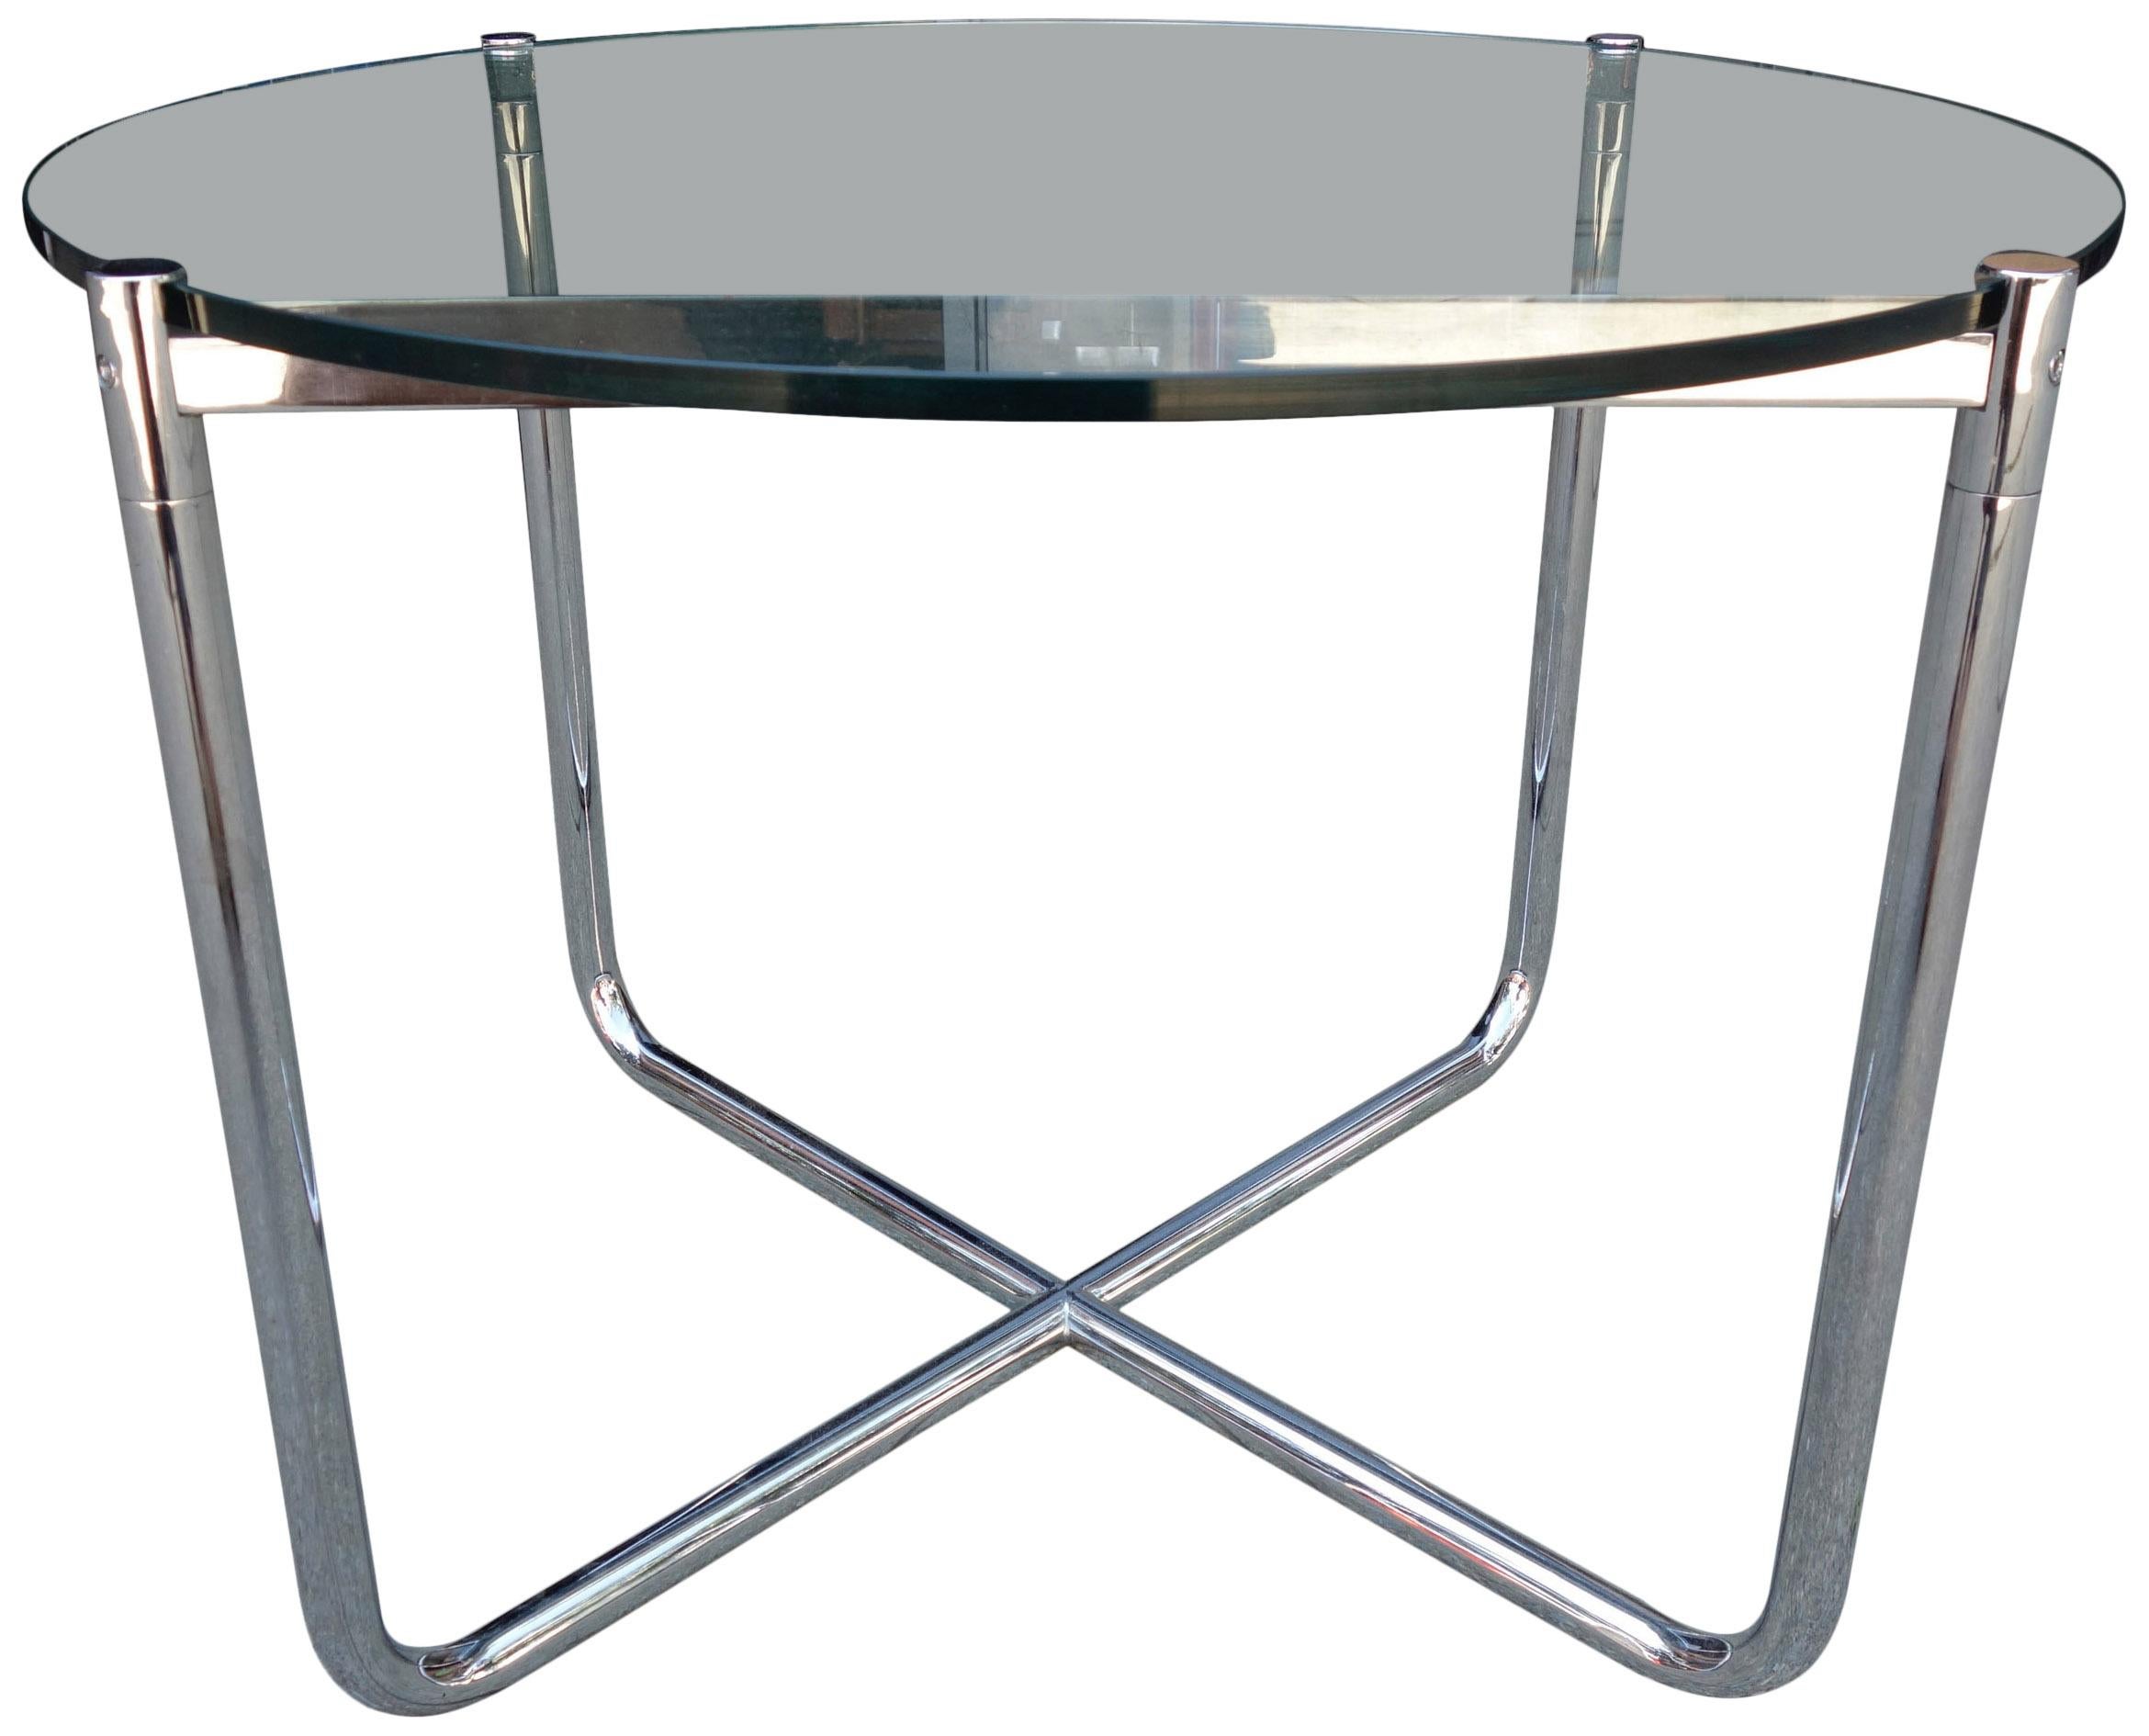 For your consideration is this beautiful heavy chromed round side table fitting perfectly with the Barcelona lounge chairs. Featuring a thick glass top and bent tube frame. The top can be removed from the frame for easier moving. The width is 28 1/2